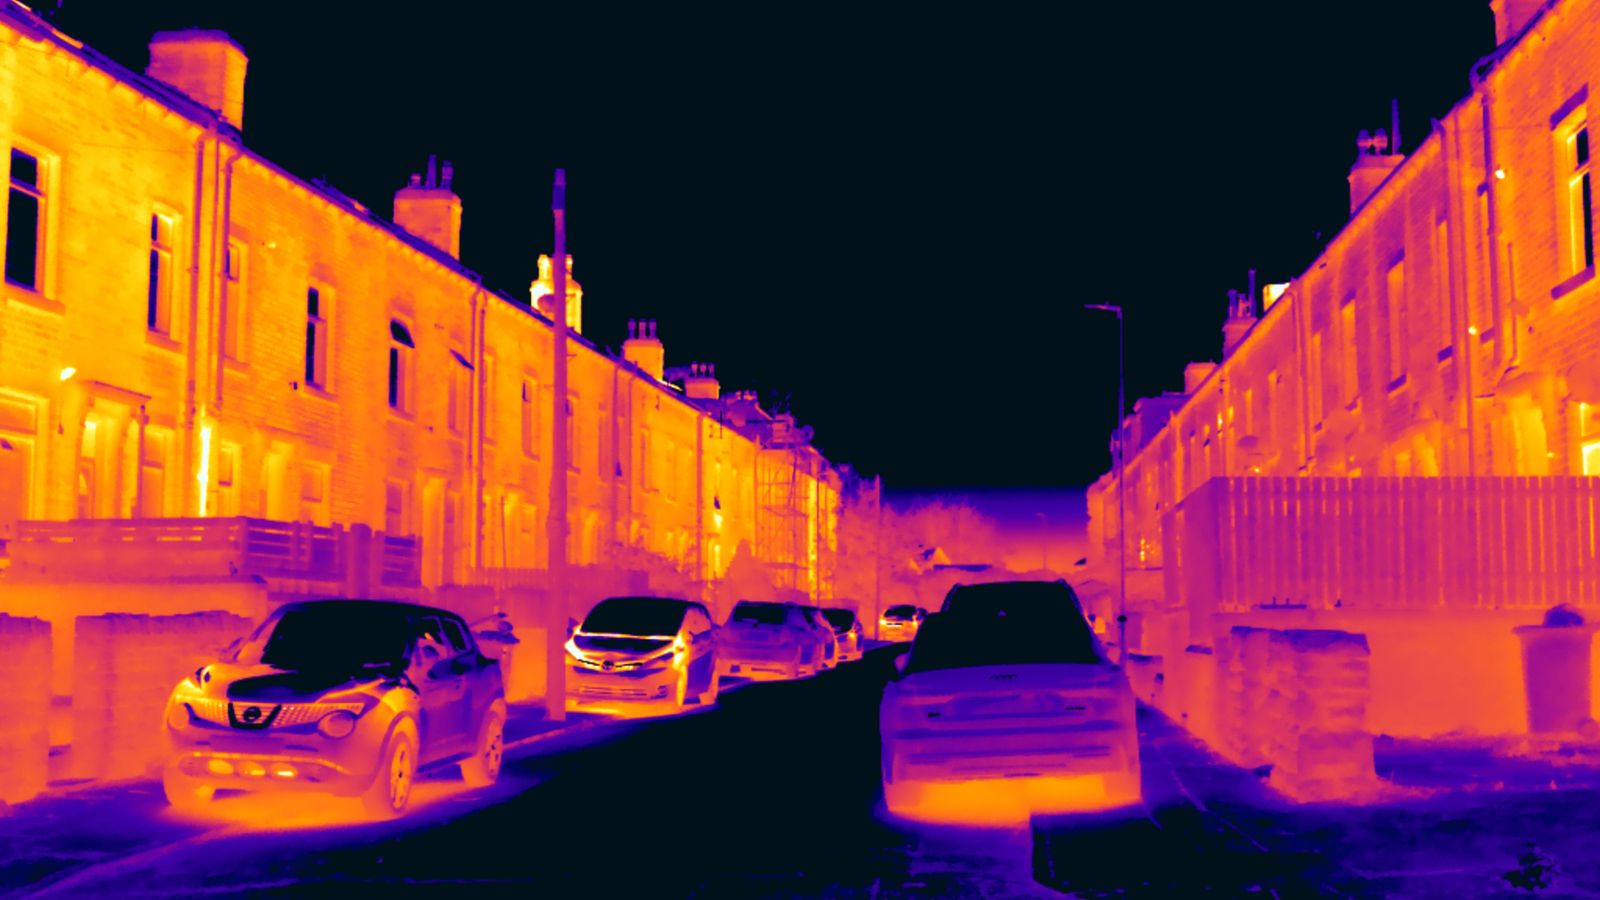 Damp walls and poor insulation: Thermal images show life inside England and Wales' coldest neighbourhoods